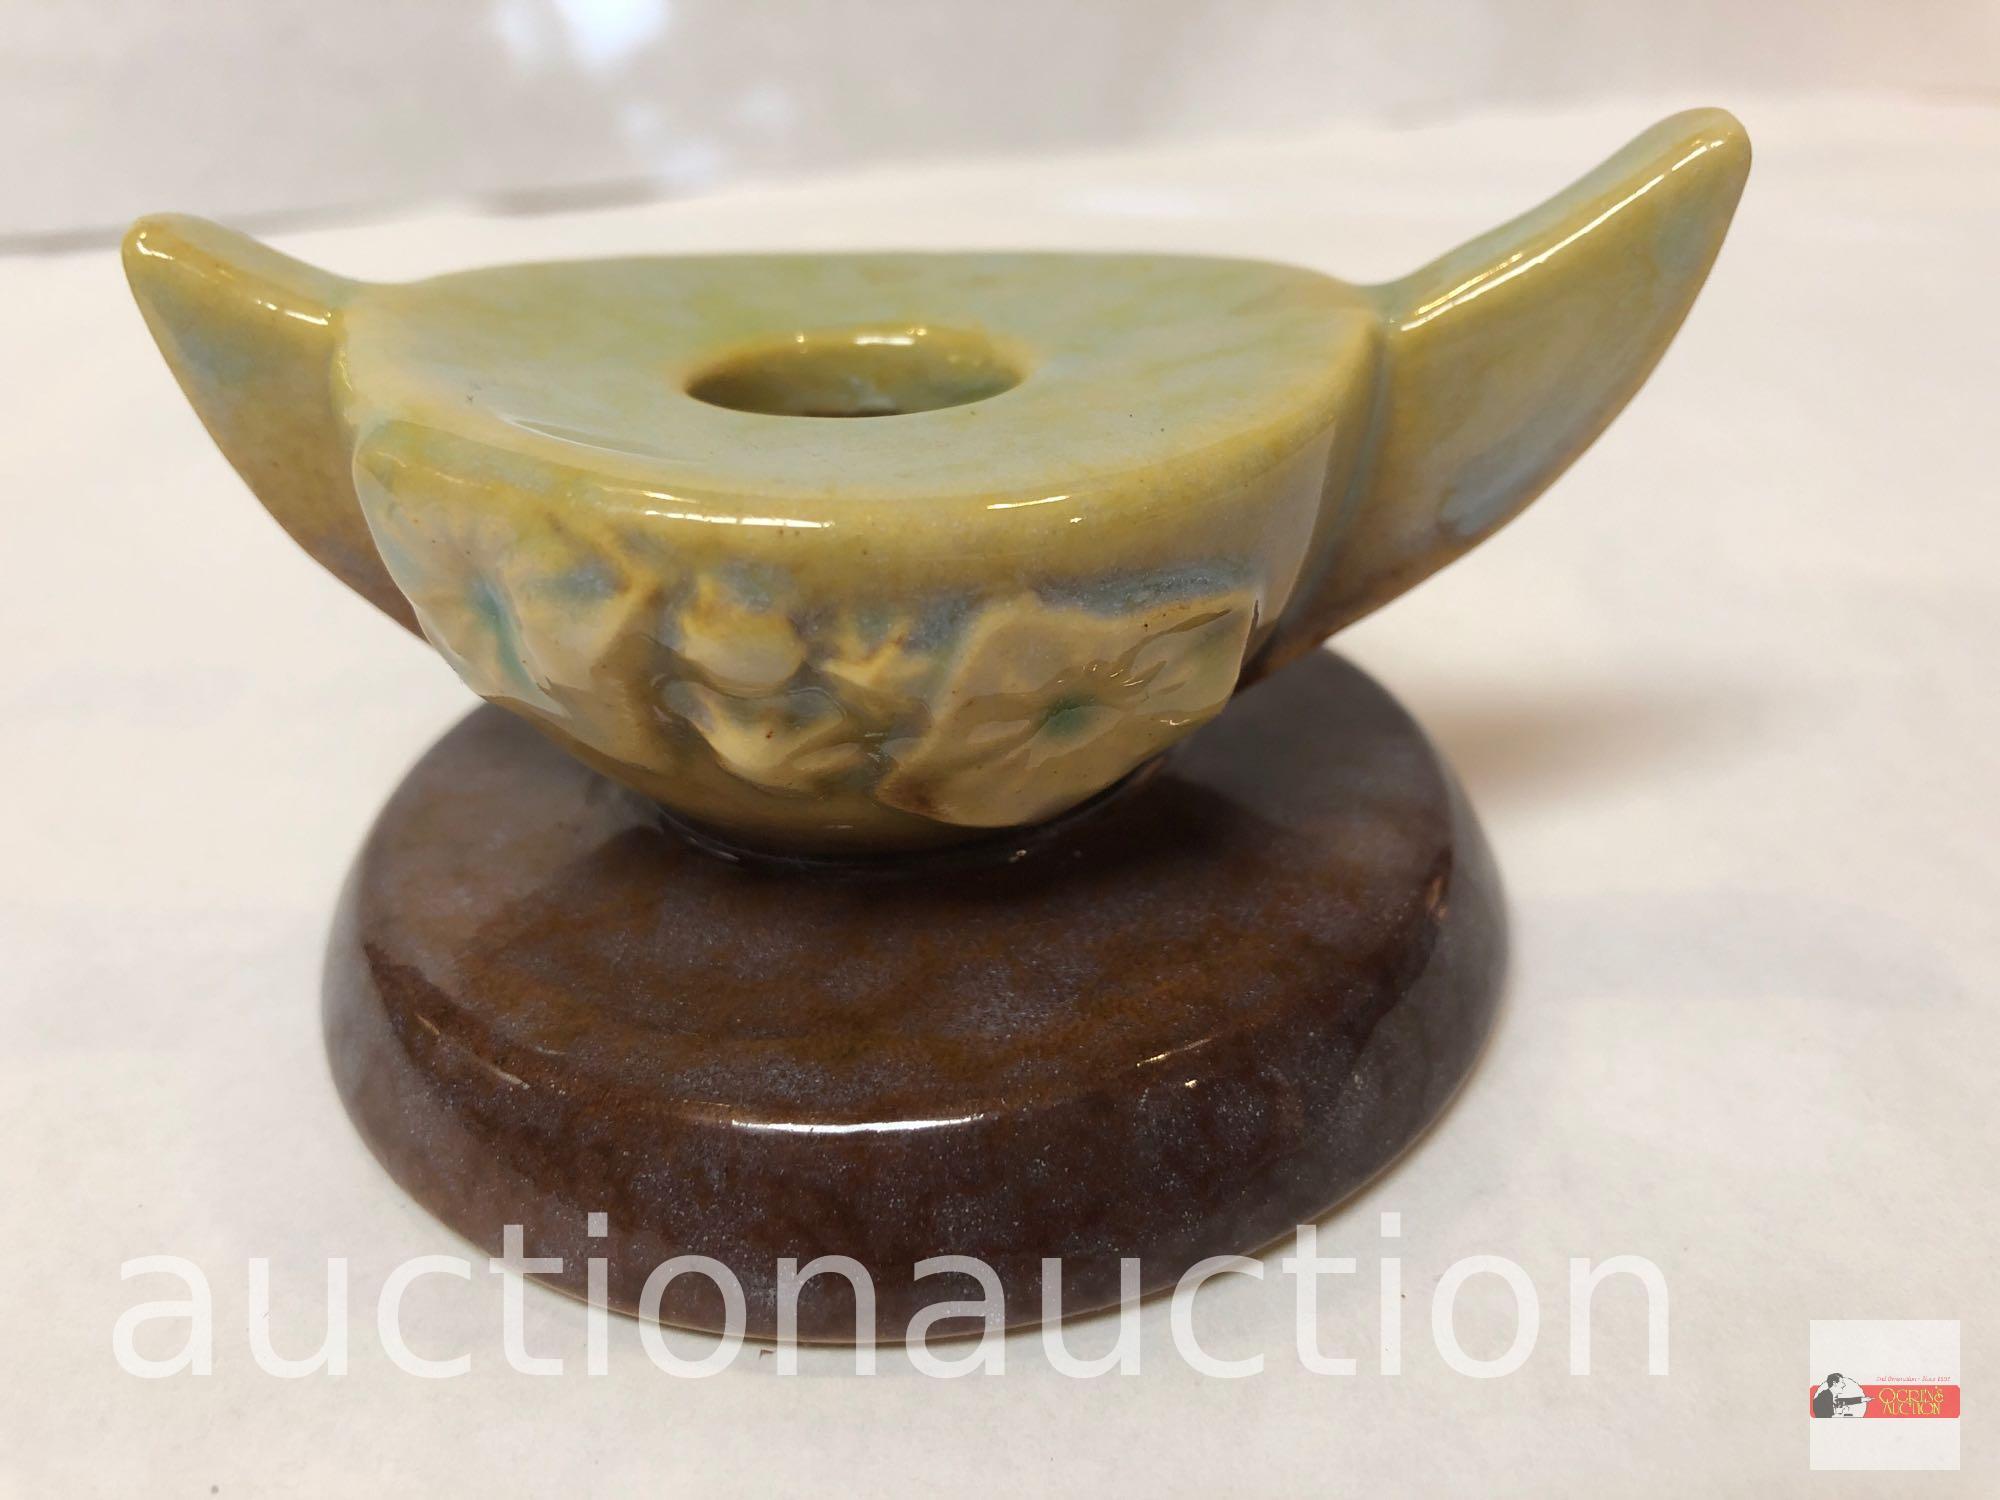 Roseville Pottery - 1948 Wincraft console bowl #227-10, Brown & pr. Wincraft brown candleholder #251